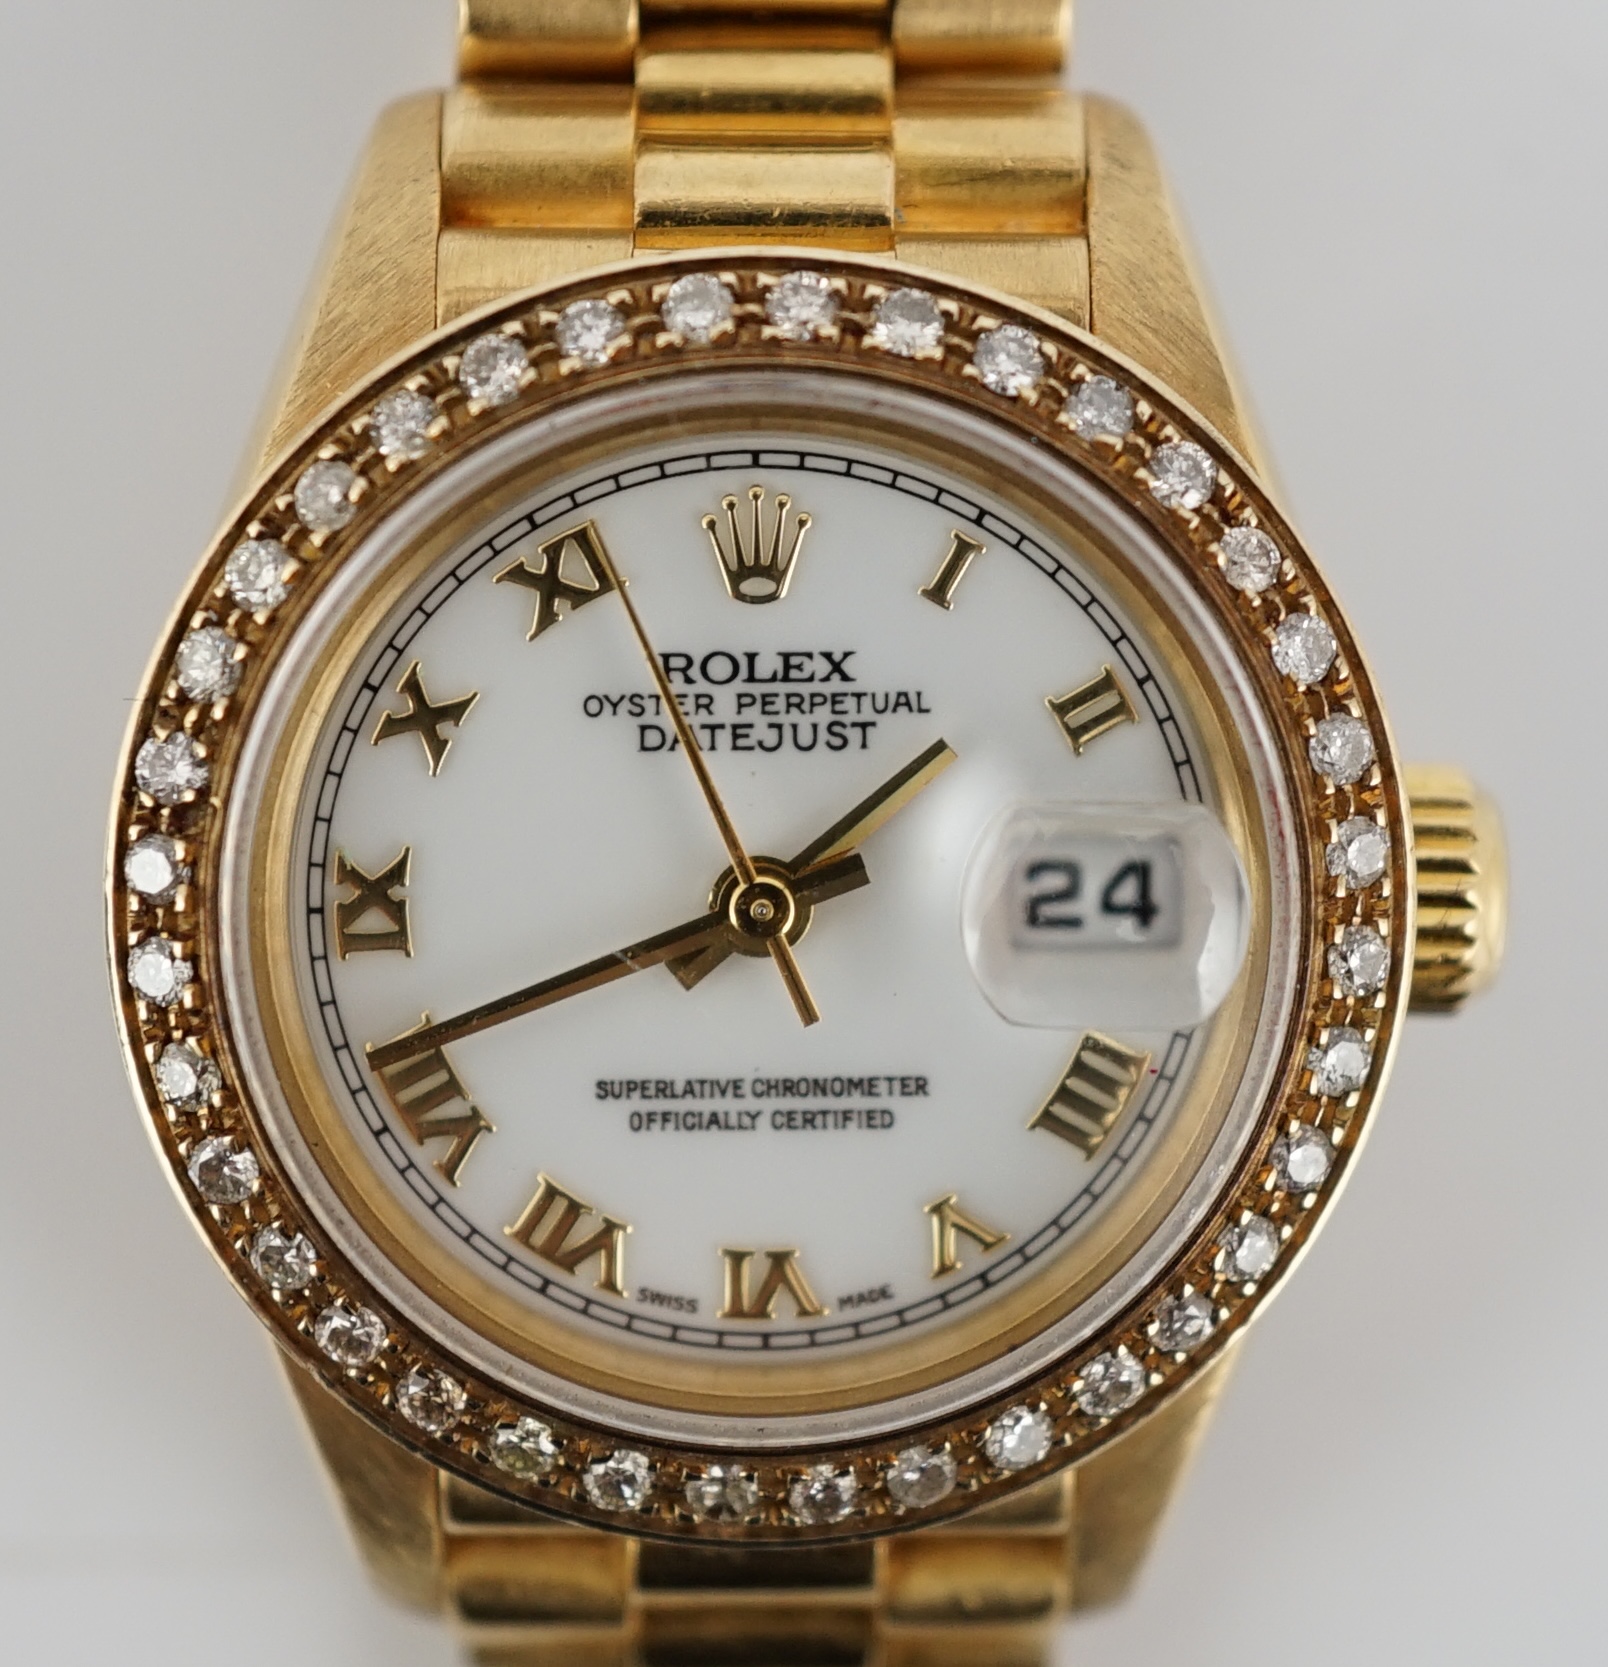 A lady's 1990's 18ct gold Rolex Oyster Perpetual Datejust wrist watch, with after market diamond set bezel